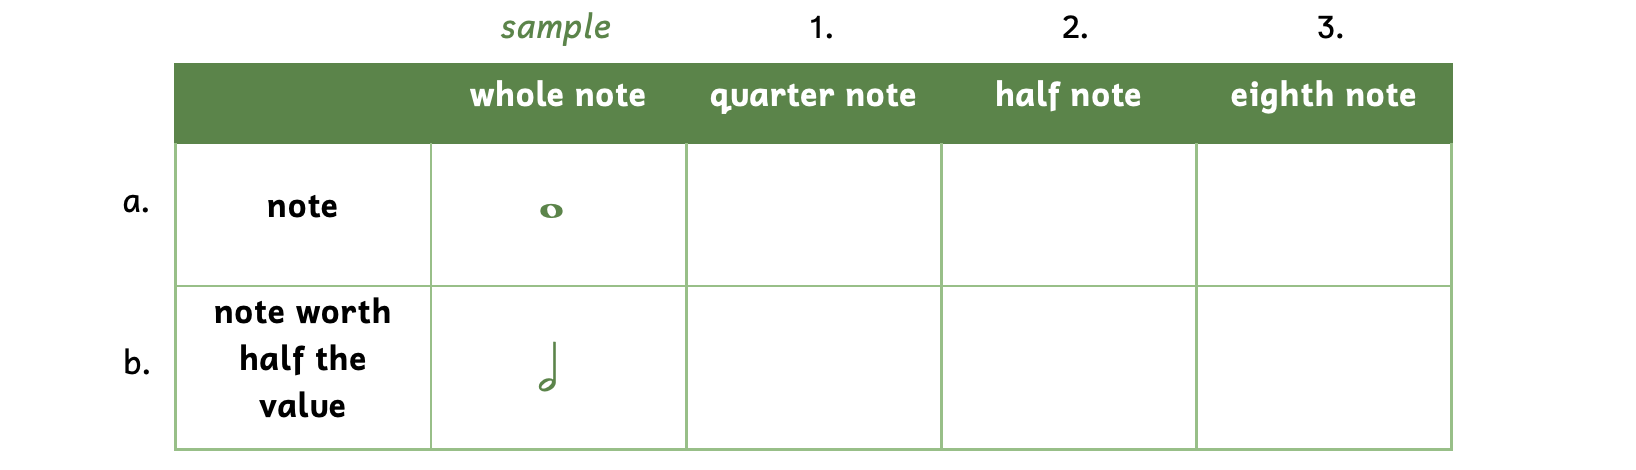 A chart asking you to draw different types of notes and a note that is worth half the value. The first row asks you to the write the given note value. The second row asks you to write the note value that is worth half the value of the note in the first row. The sample asks for a whole note, so a whole note is drawn in the first row and a half note is drawn in the second row. Number 1 asks for a quarter note. Number 2 asks for a half note. Number 3 asks for an eighth note.